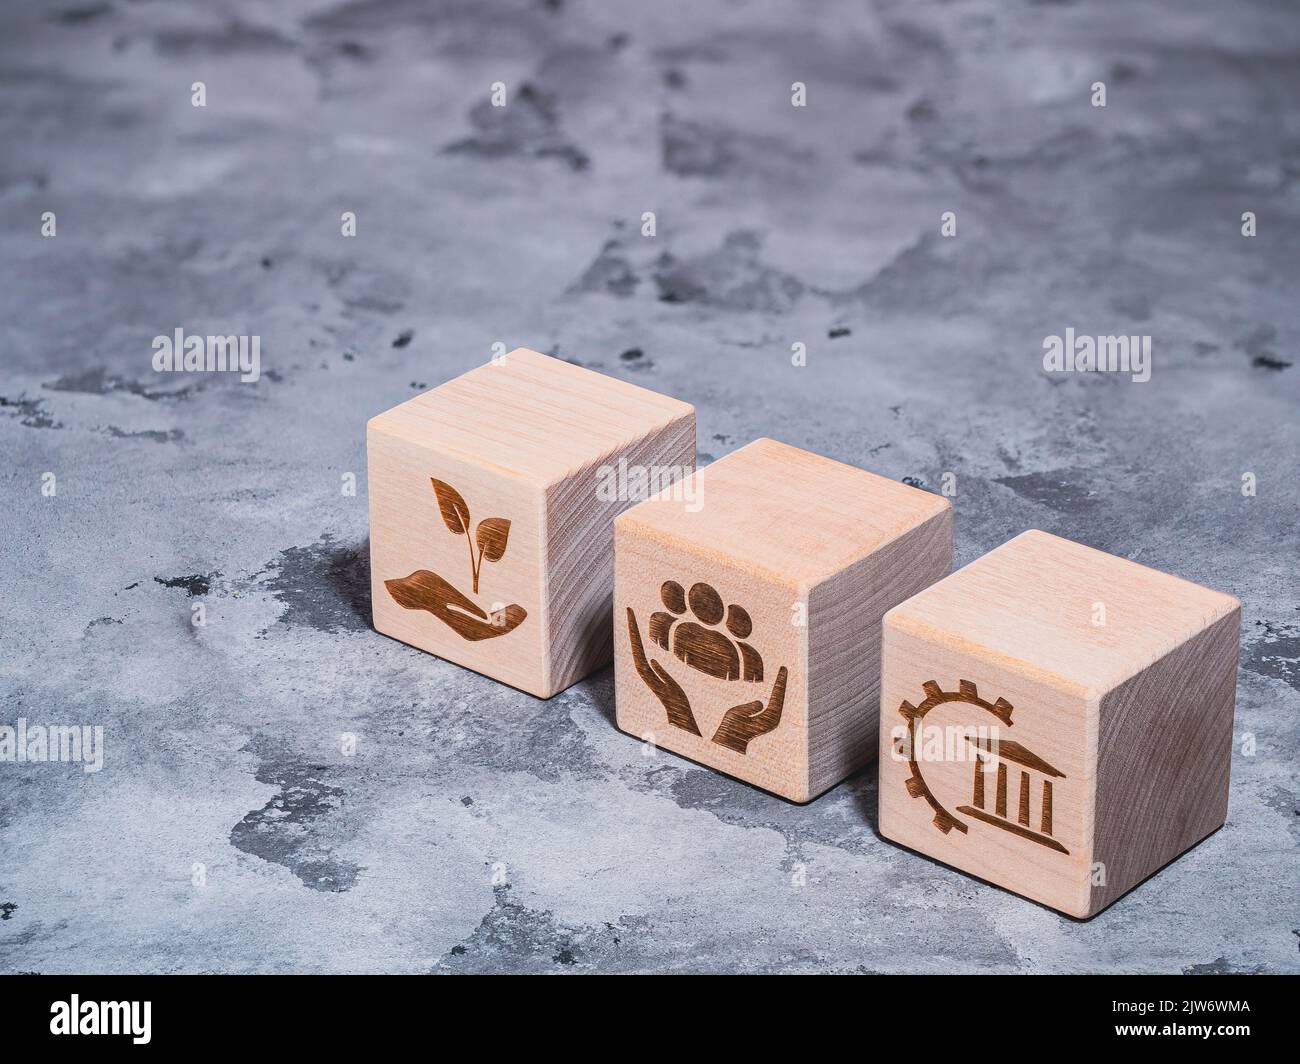 ESG symbols on wood blocks as environmental conservation and renewable resource concept Stock Photo